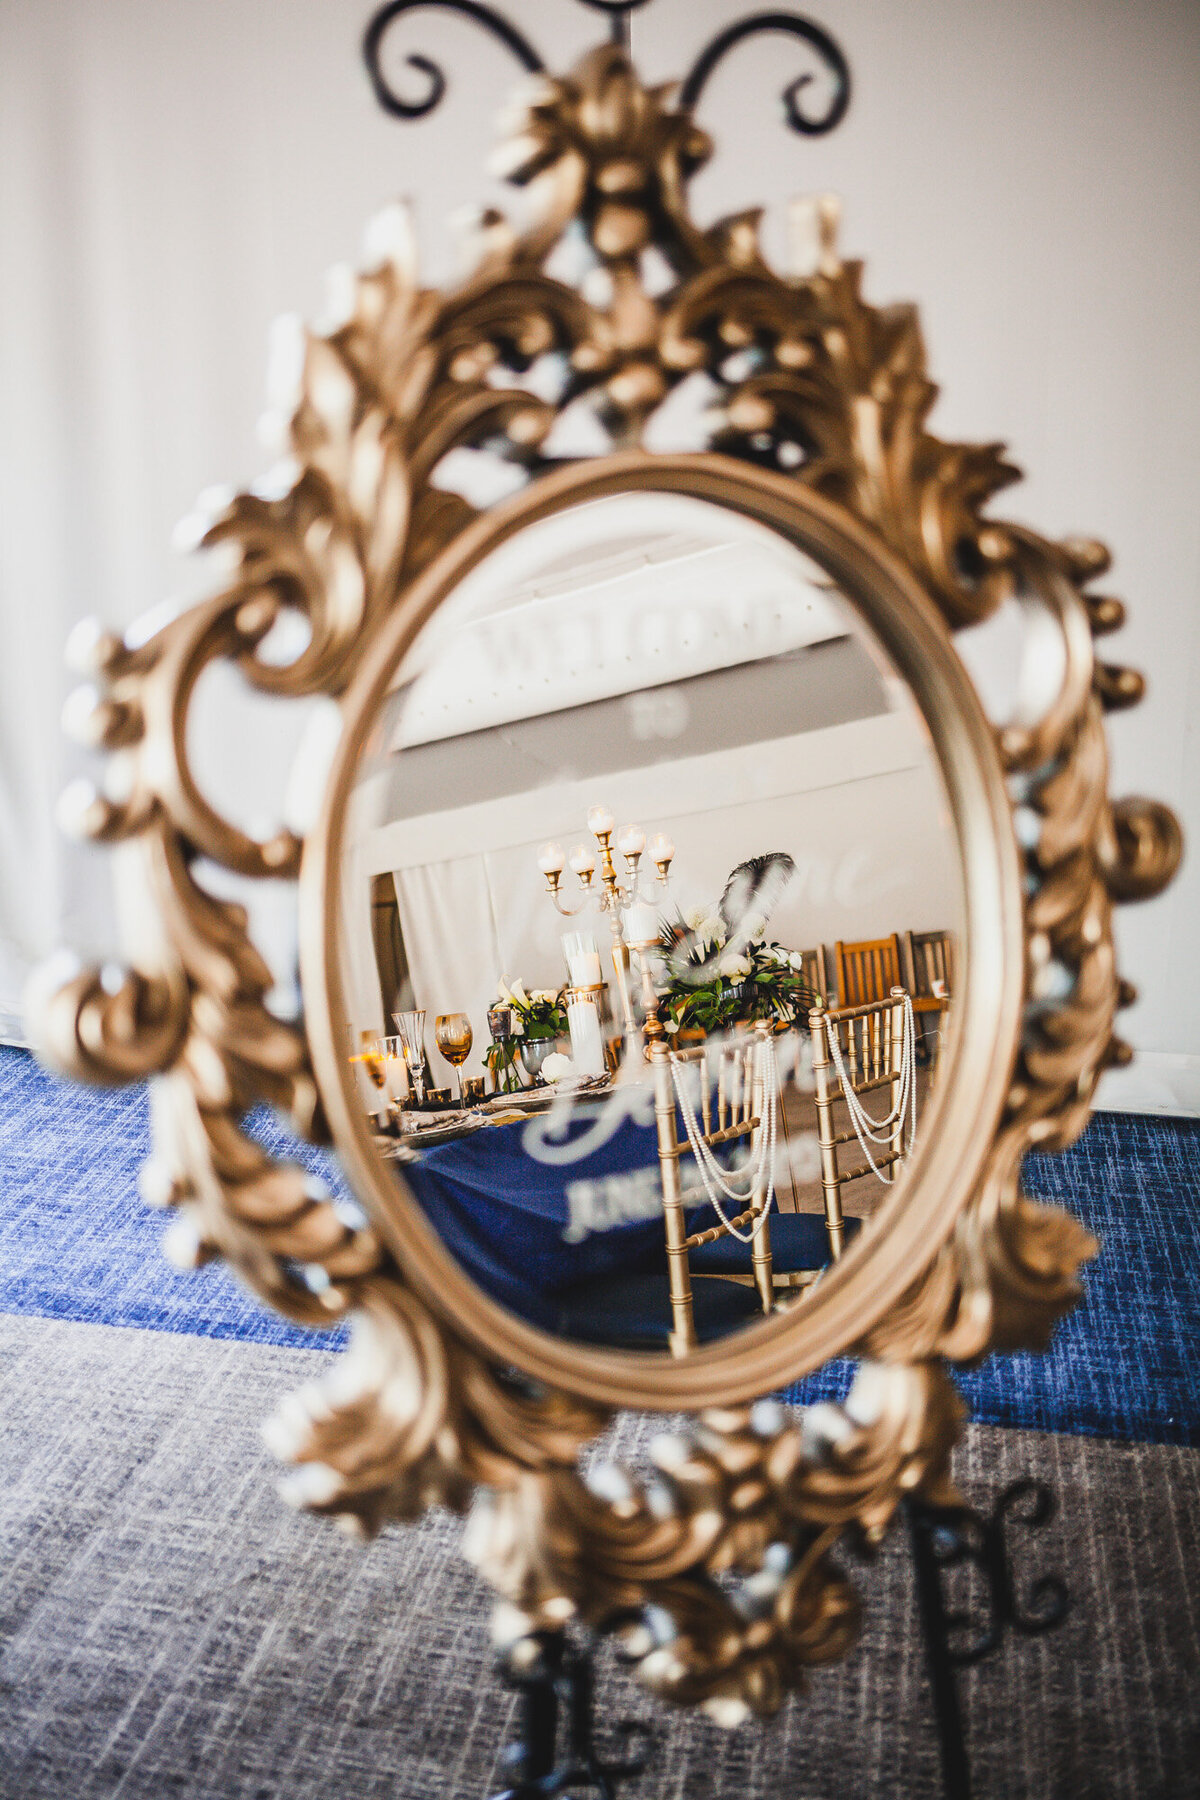 Small round mirror with wedding details